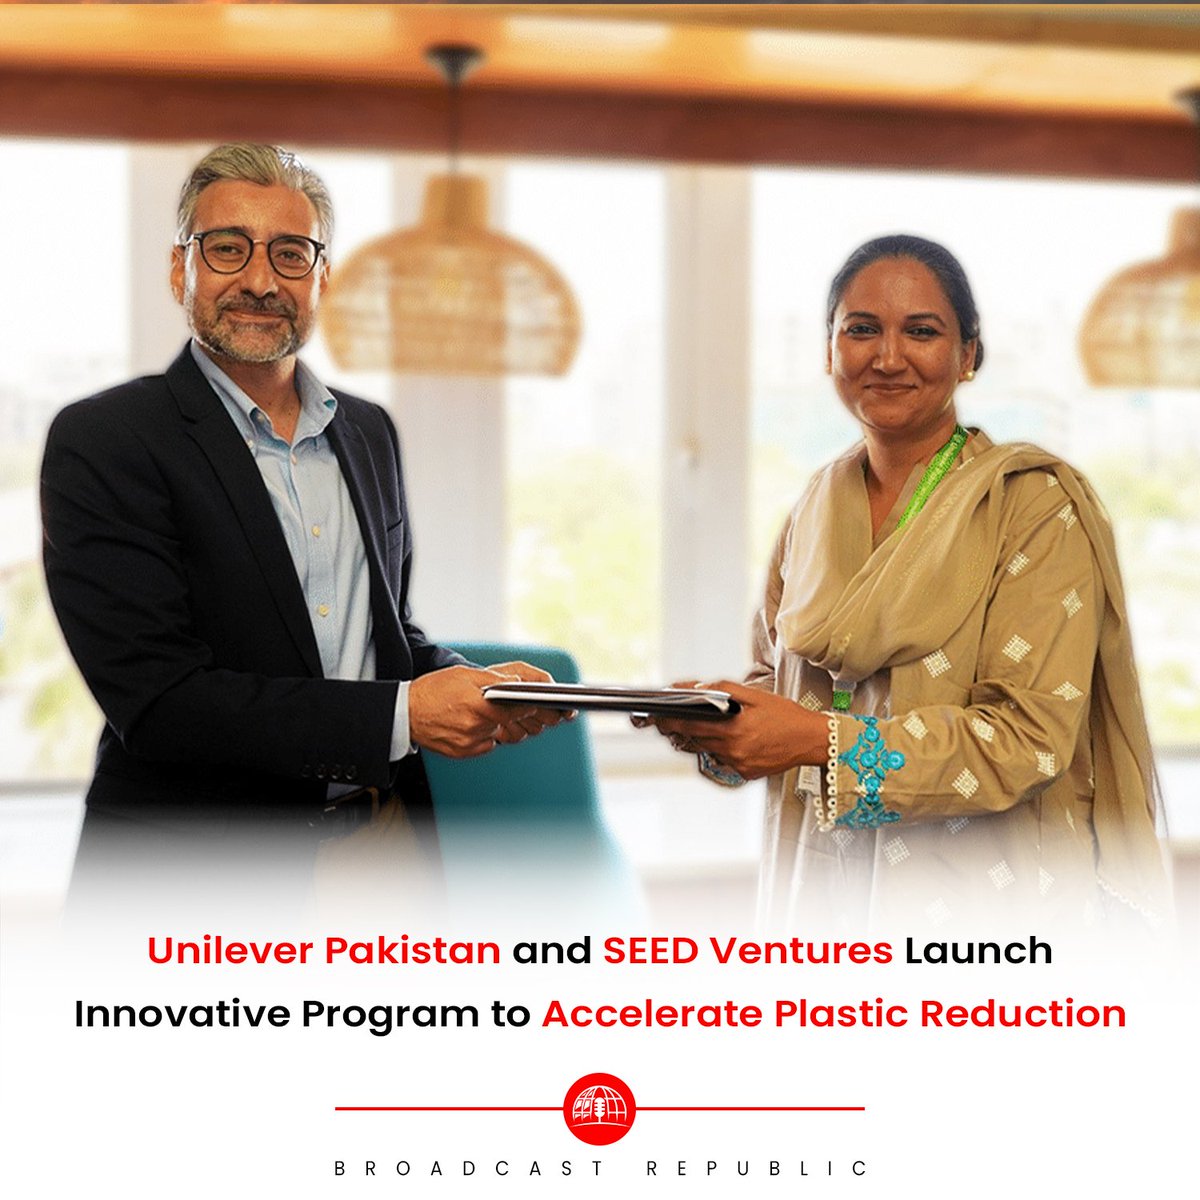 Unilever Pakistan and SEED Ventures have launched an innovative program, 'Accelerating Plastic Reduction', aimed at reducing plastic waste and promoting sustainable practices in Pakistan. 

#BroadcastRepublic #UnileverPakistan #SEEDVentures #AcceleratingPlasticReduction